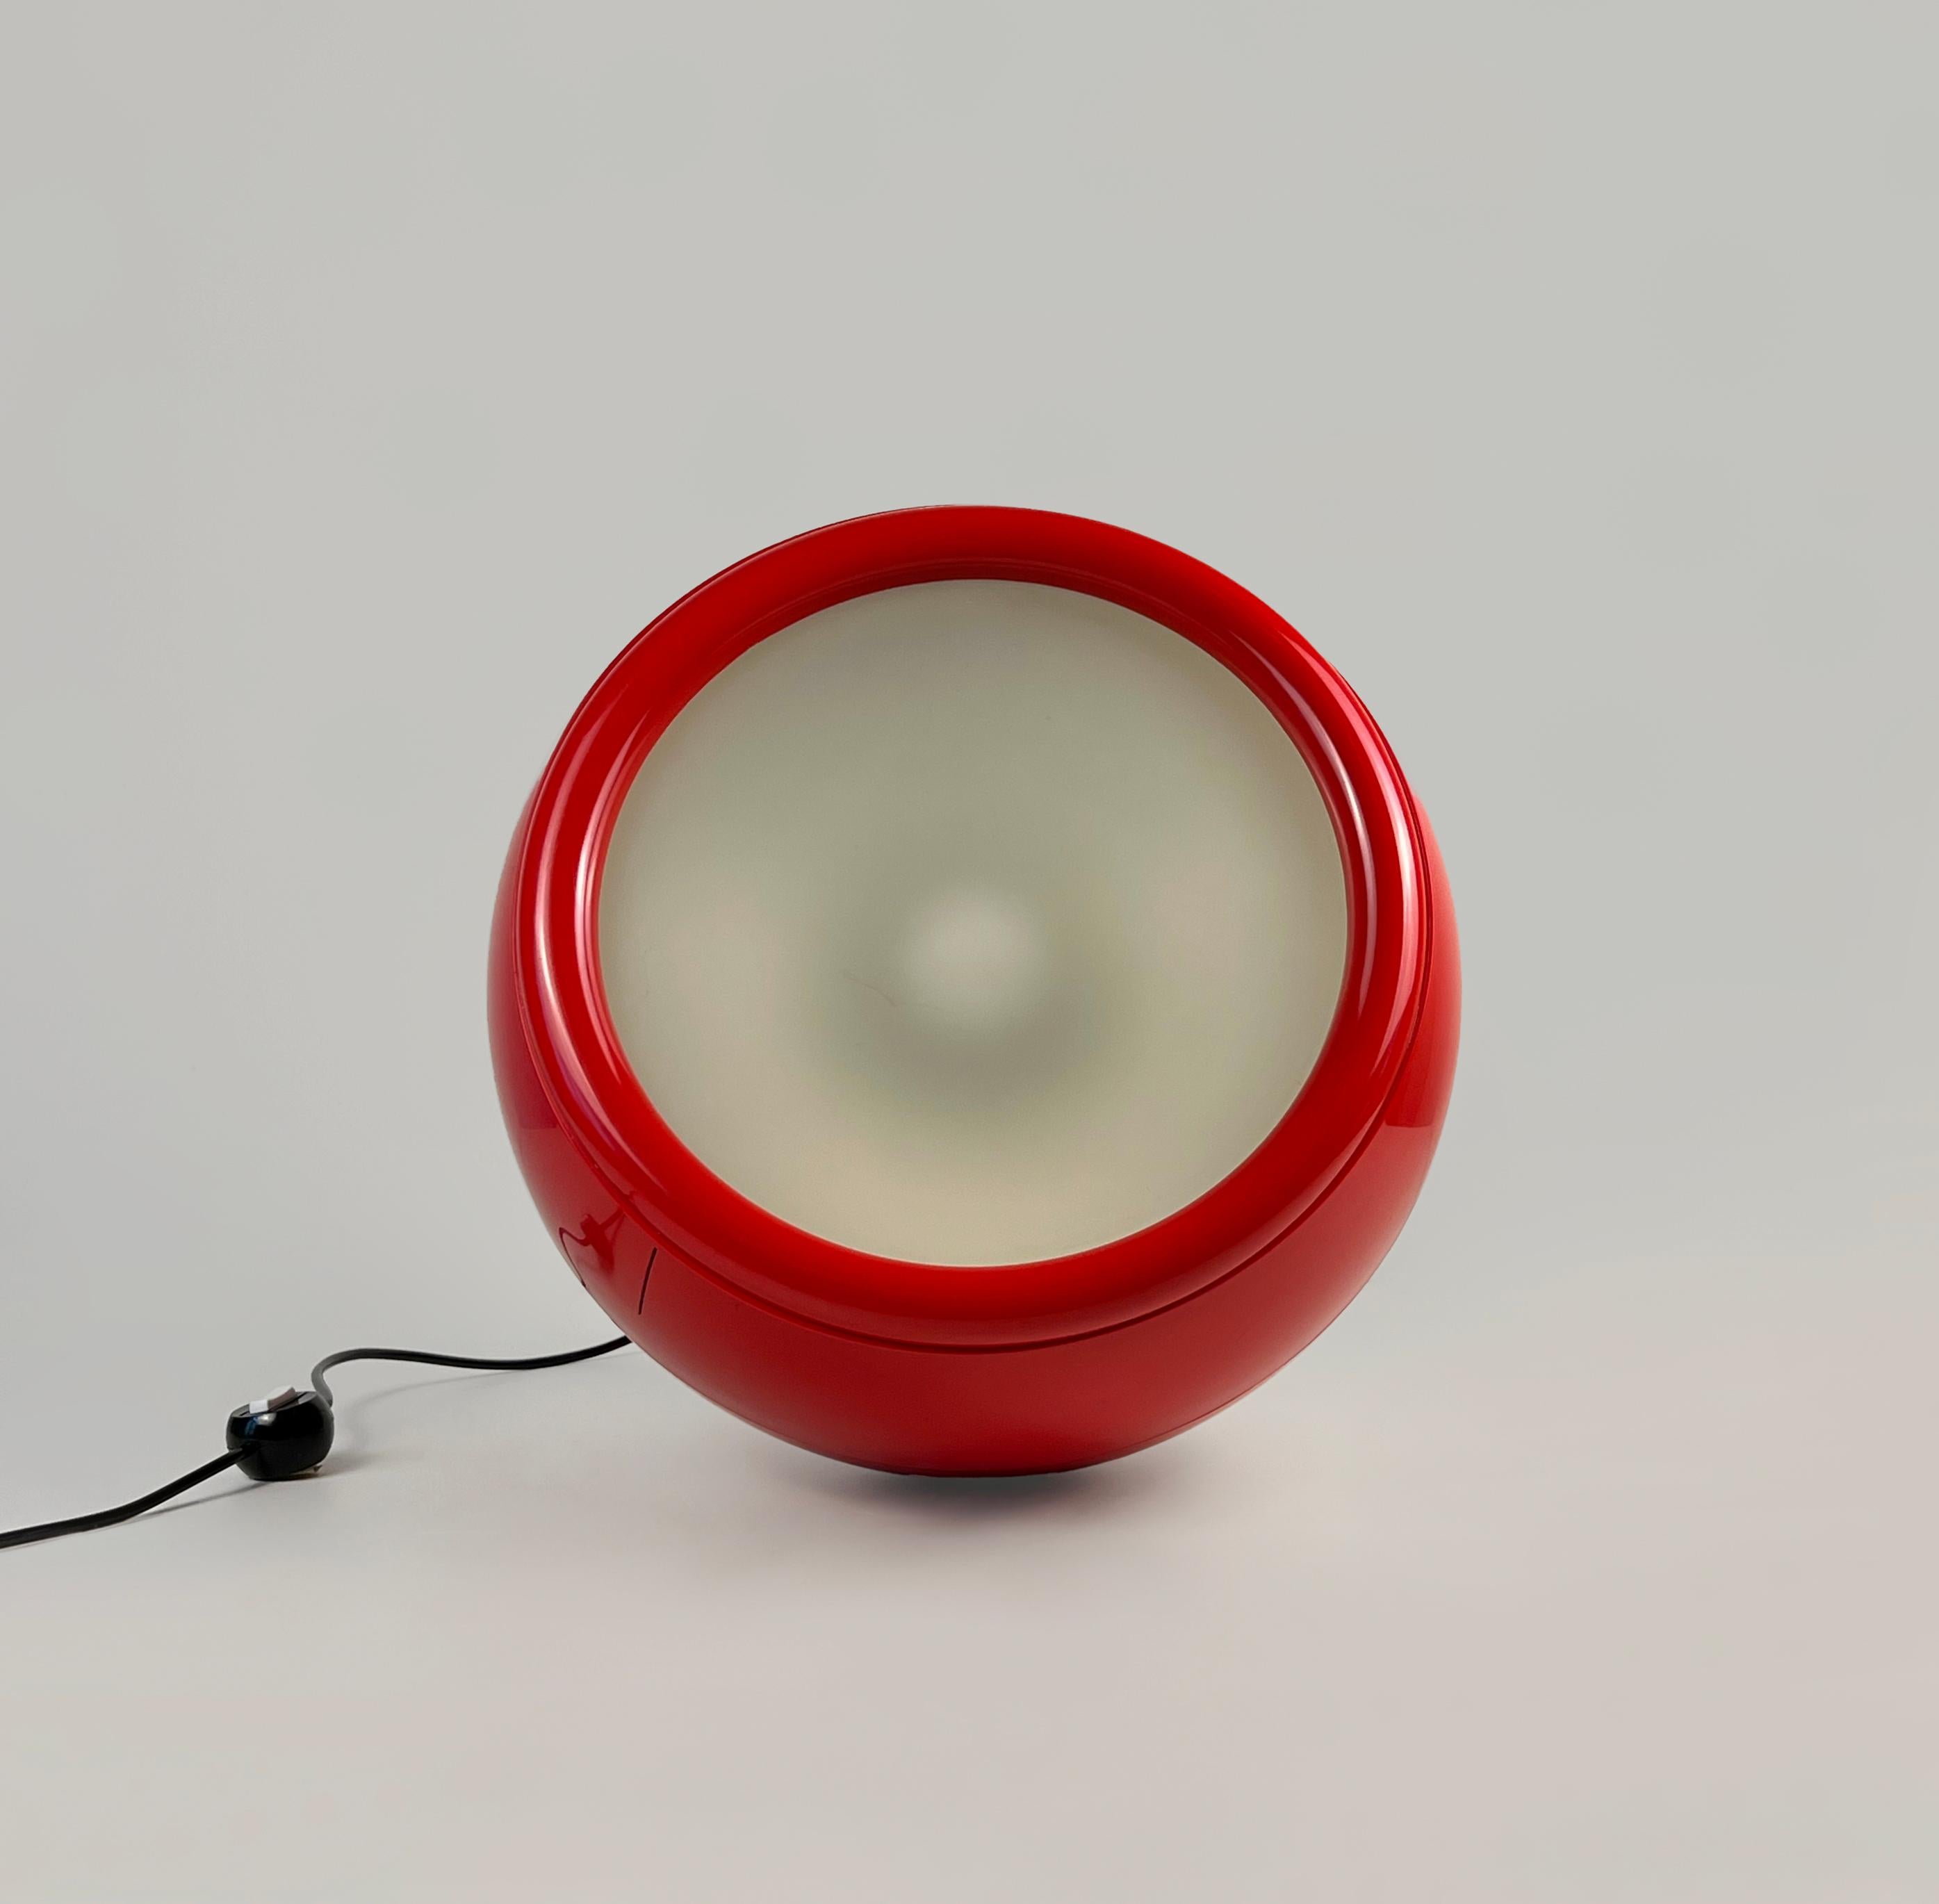 Mid-Century Modern Red Pallade (1st Ed. 1968) floor lamp designed by Studio Tetrarch for Artemide For Sale